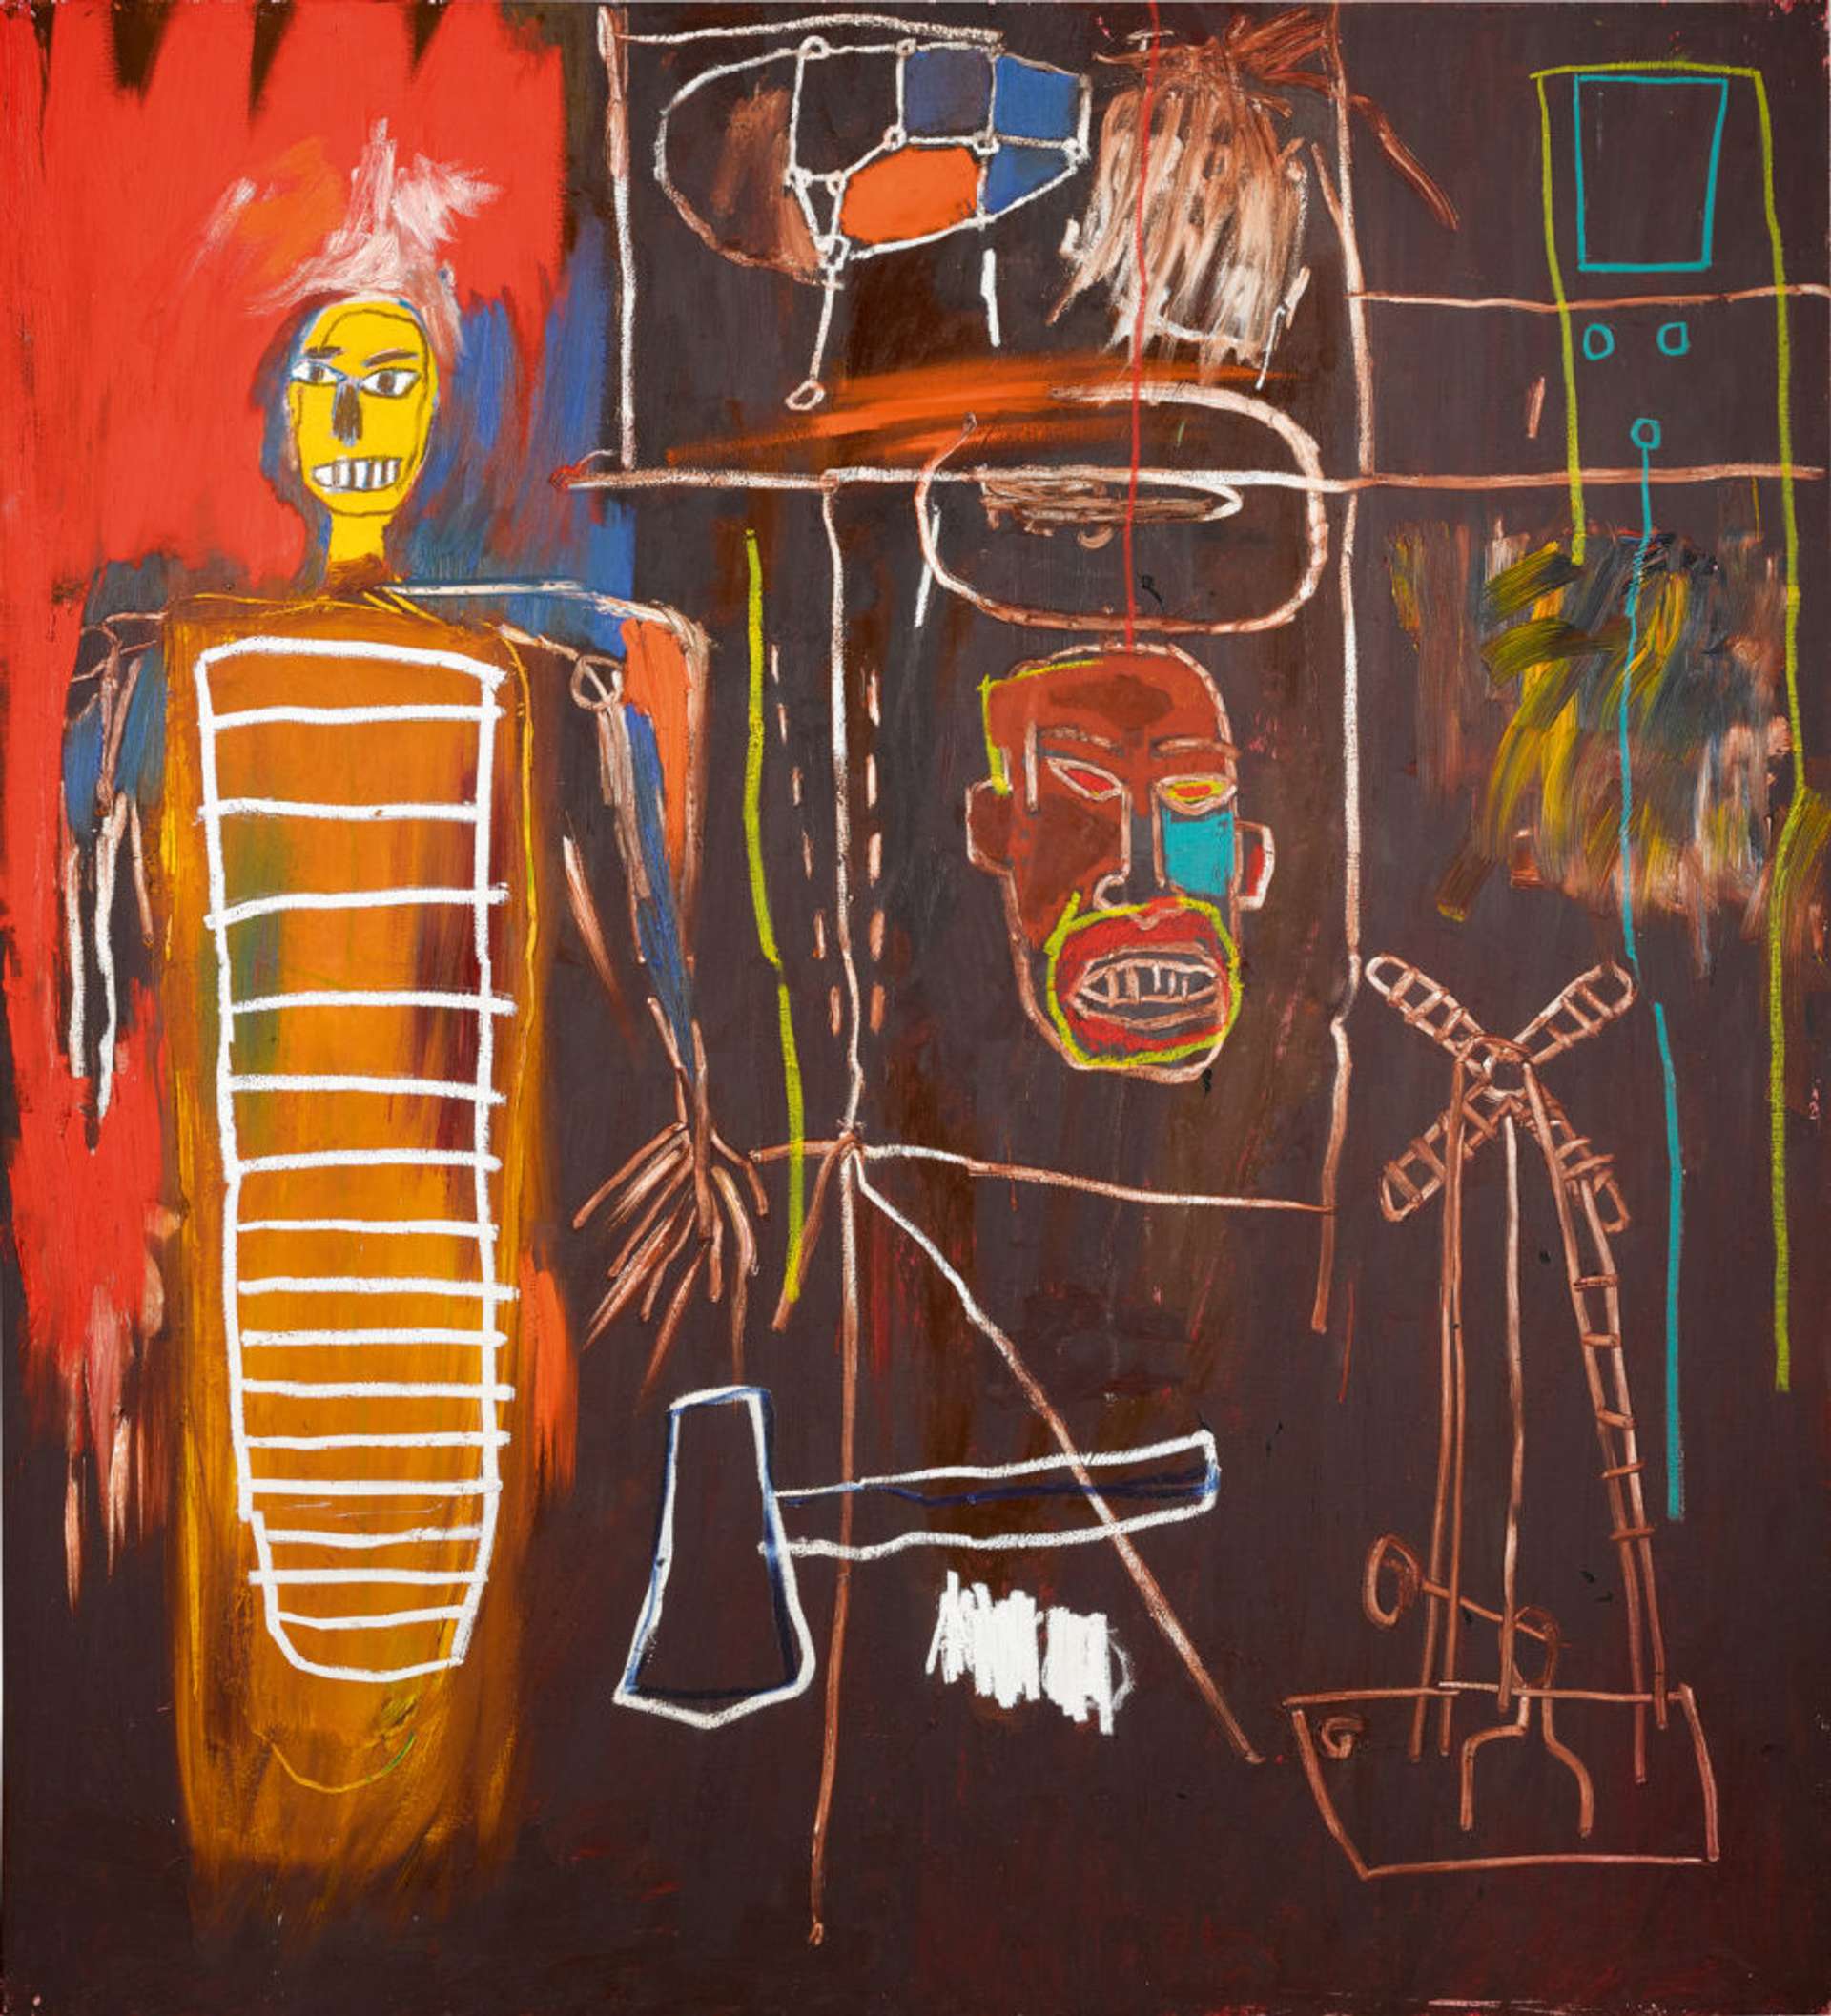 Jean-Michel Basquiat’s Air Power. A Neo-Expressionist style portrait including a mask-like head figure, an axe, and standing figure.